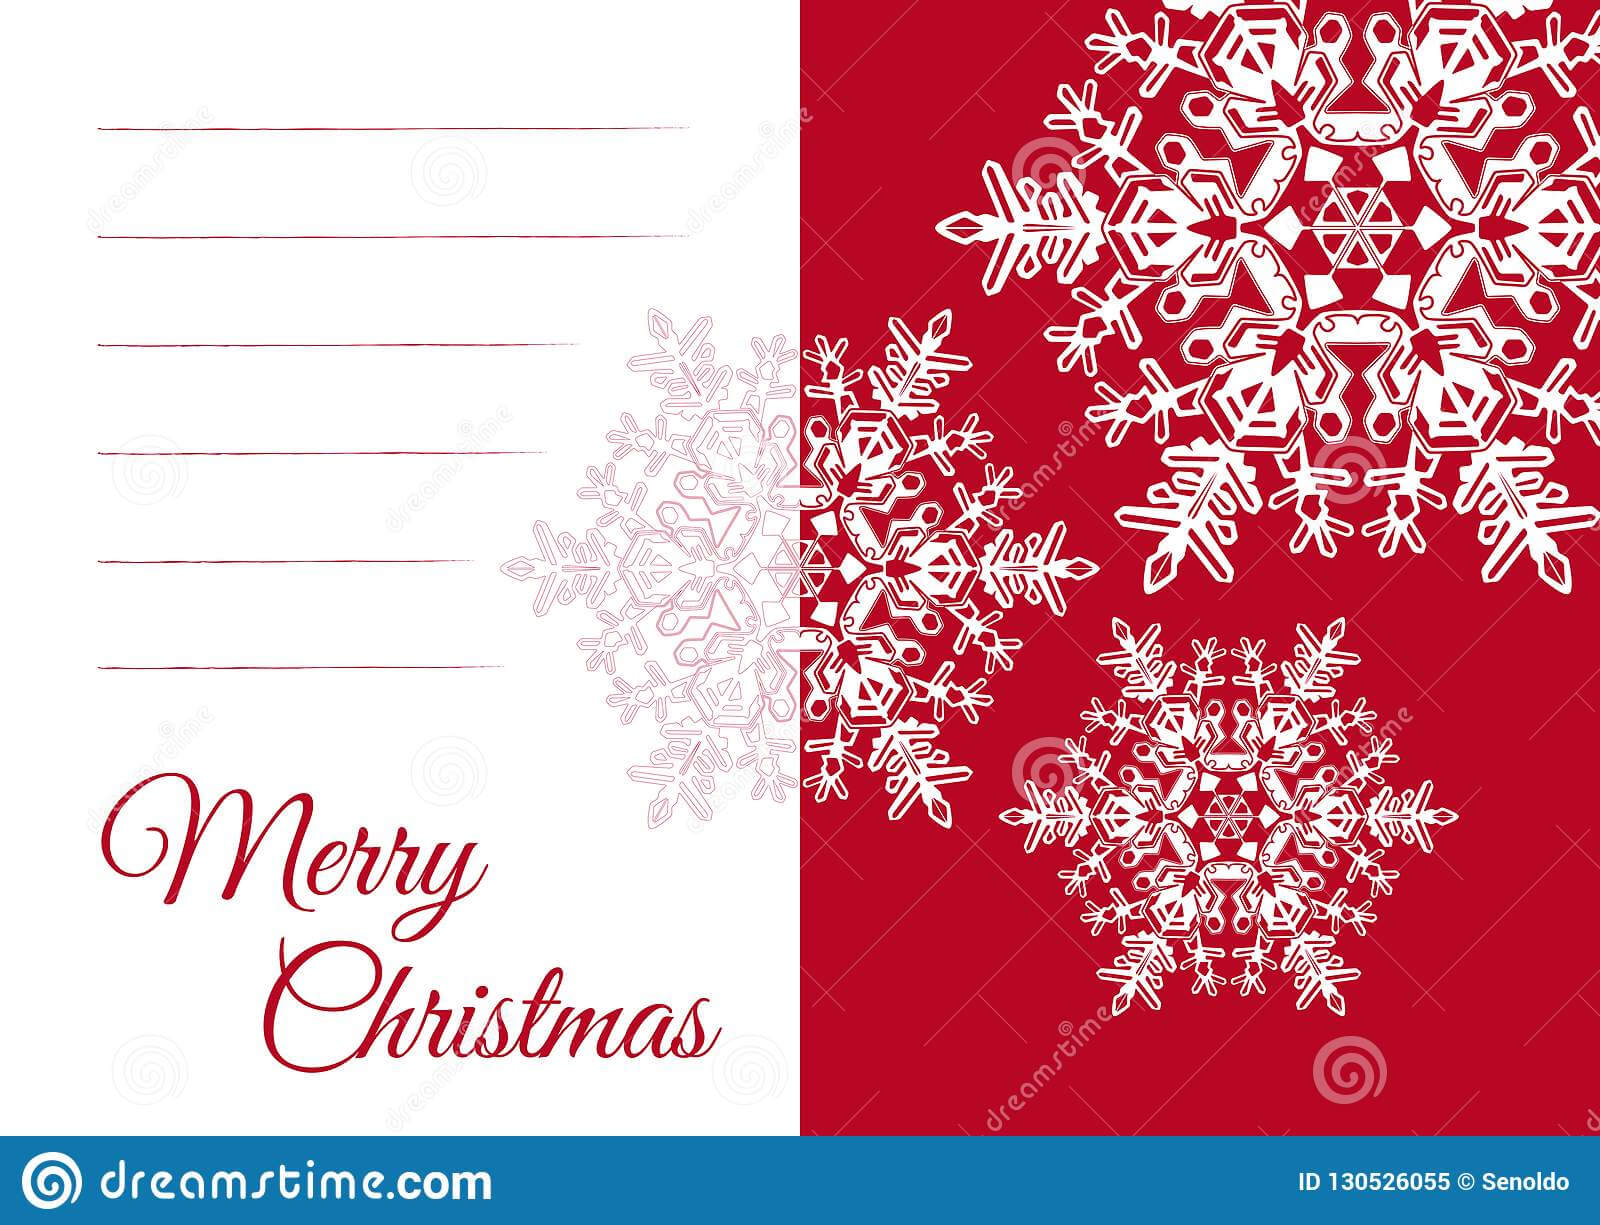 Christmas Greeting Card Template With Blank Text Field Stock Inside Blank Christmas Card Templates Free